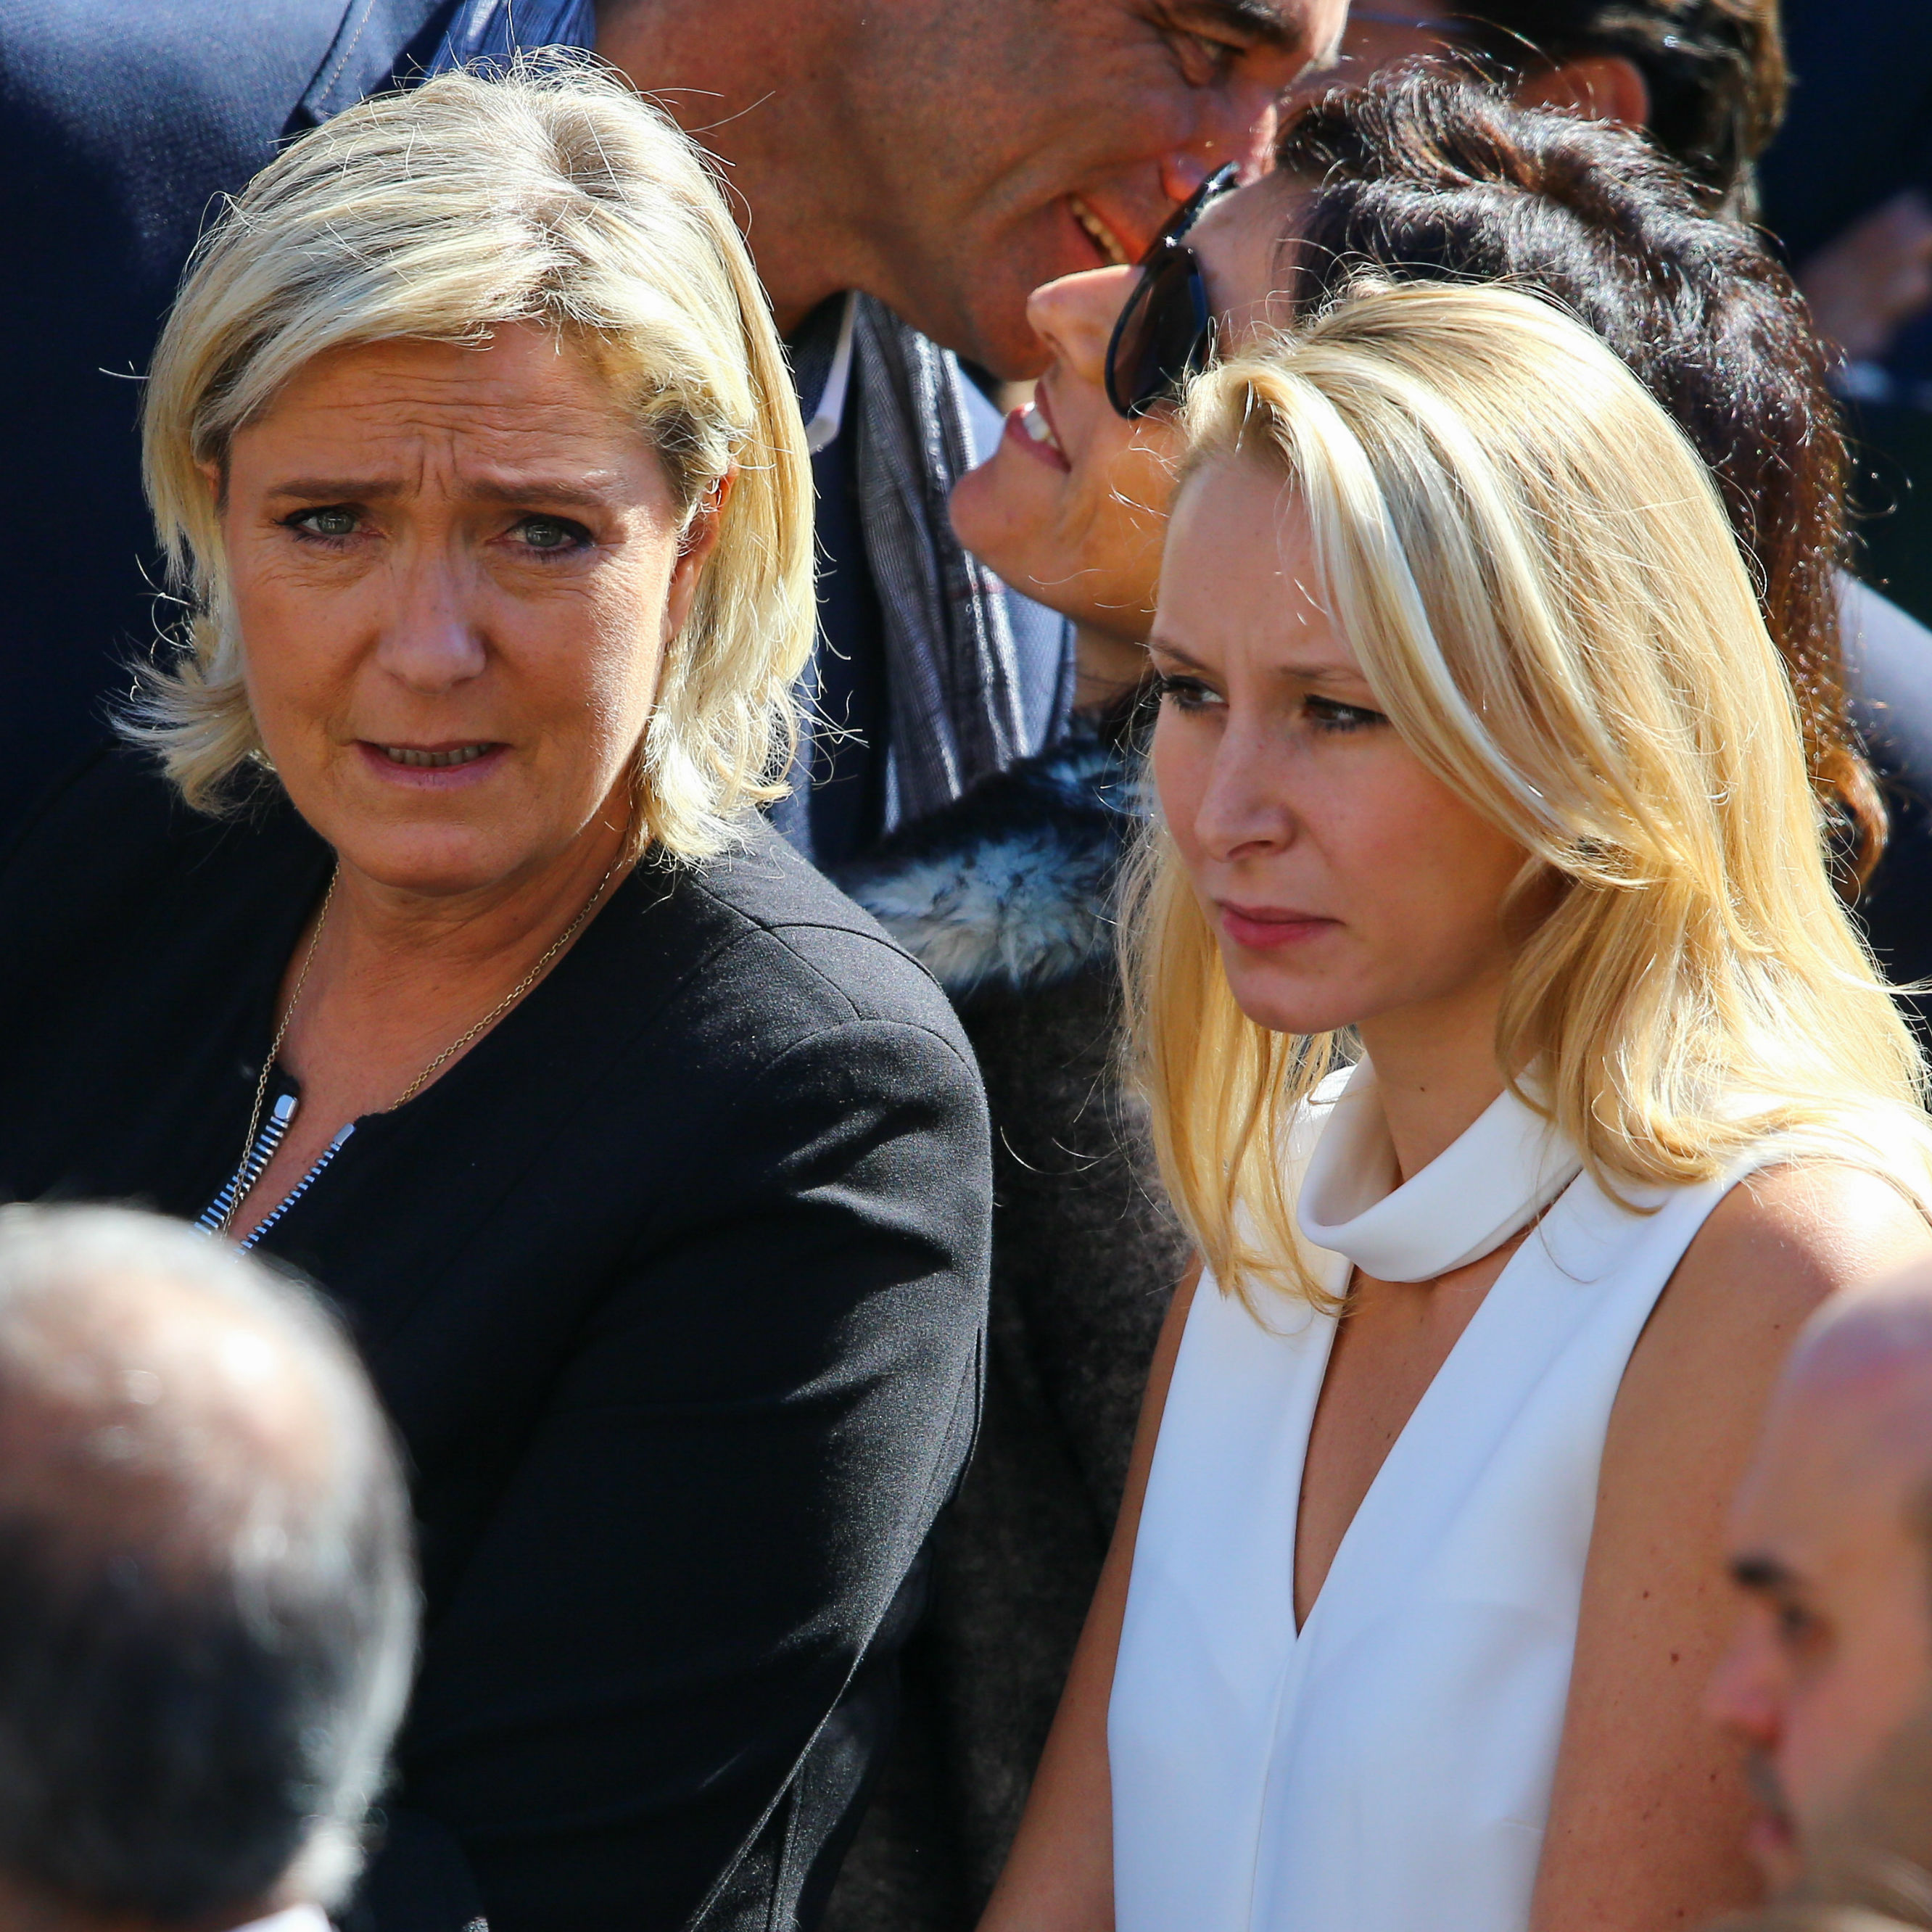 Niece of France's National Front leader attacks 'timid' church over abortion